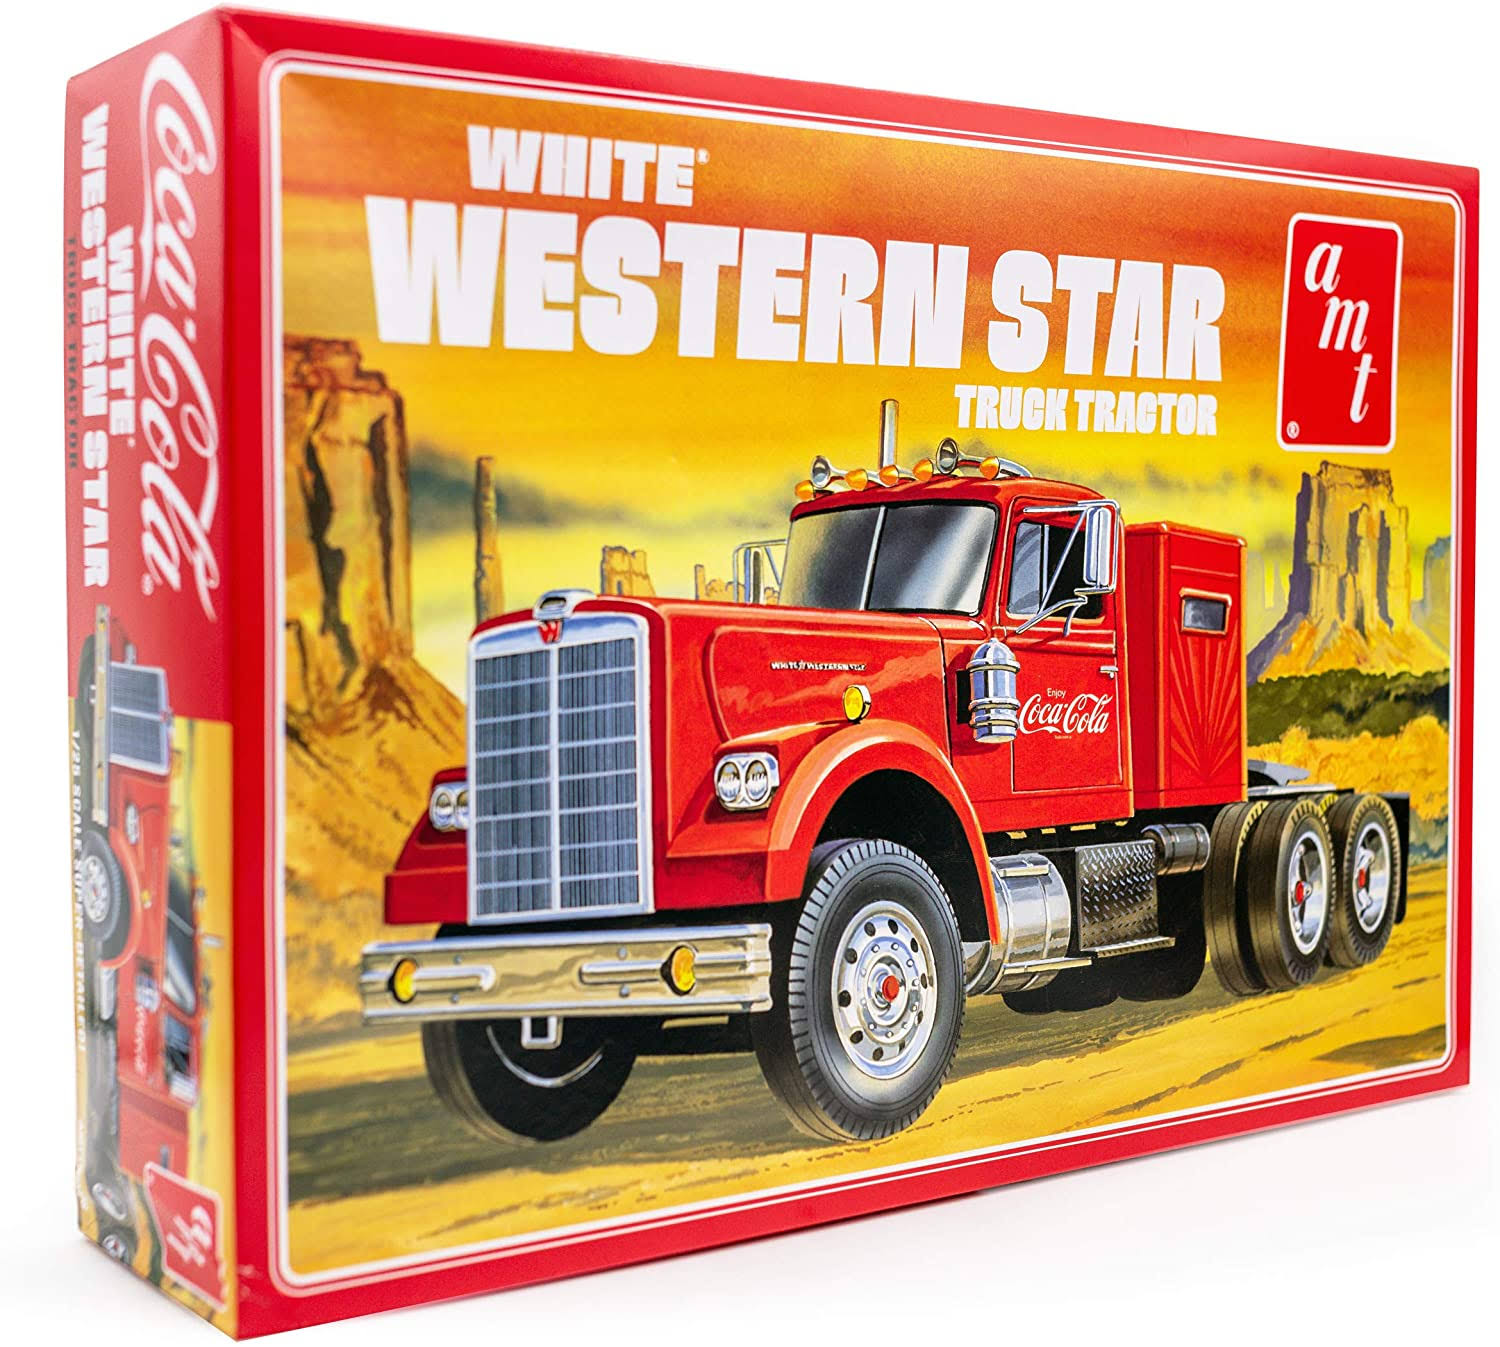 Amt Coca Cola White Western Star Truck Tractor Model Kit - 1/25 Scale